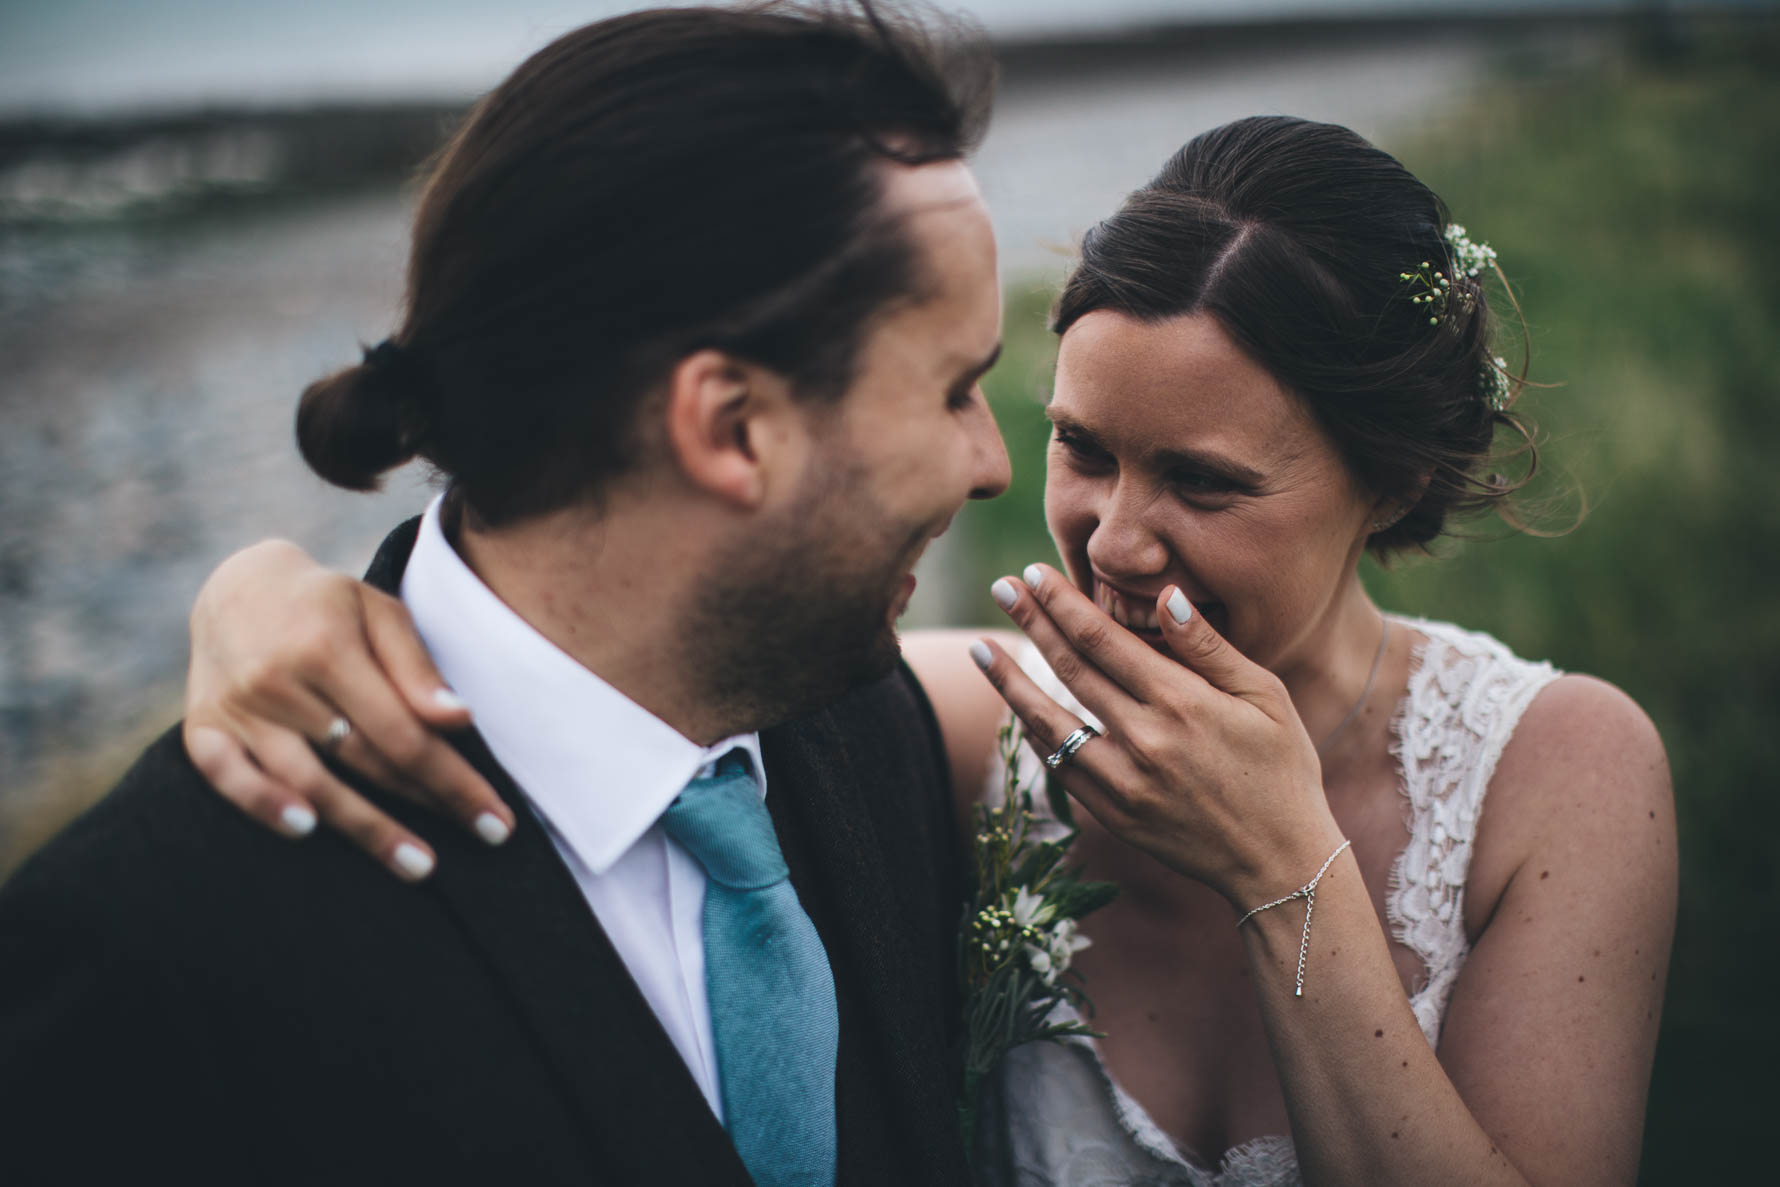 Bride has one hand around the groom's neck and her other covering her mouth as she is laughing as she looks towards the groom